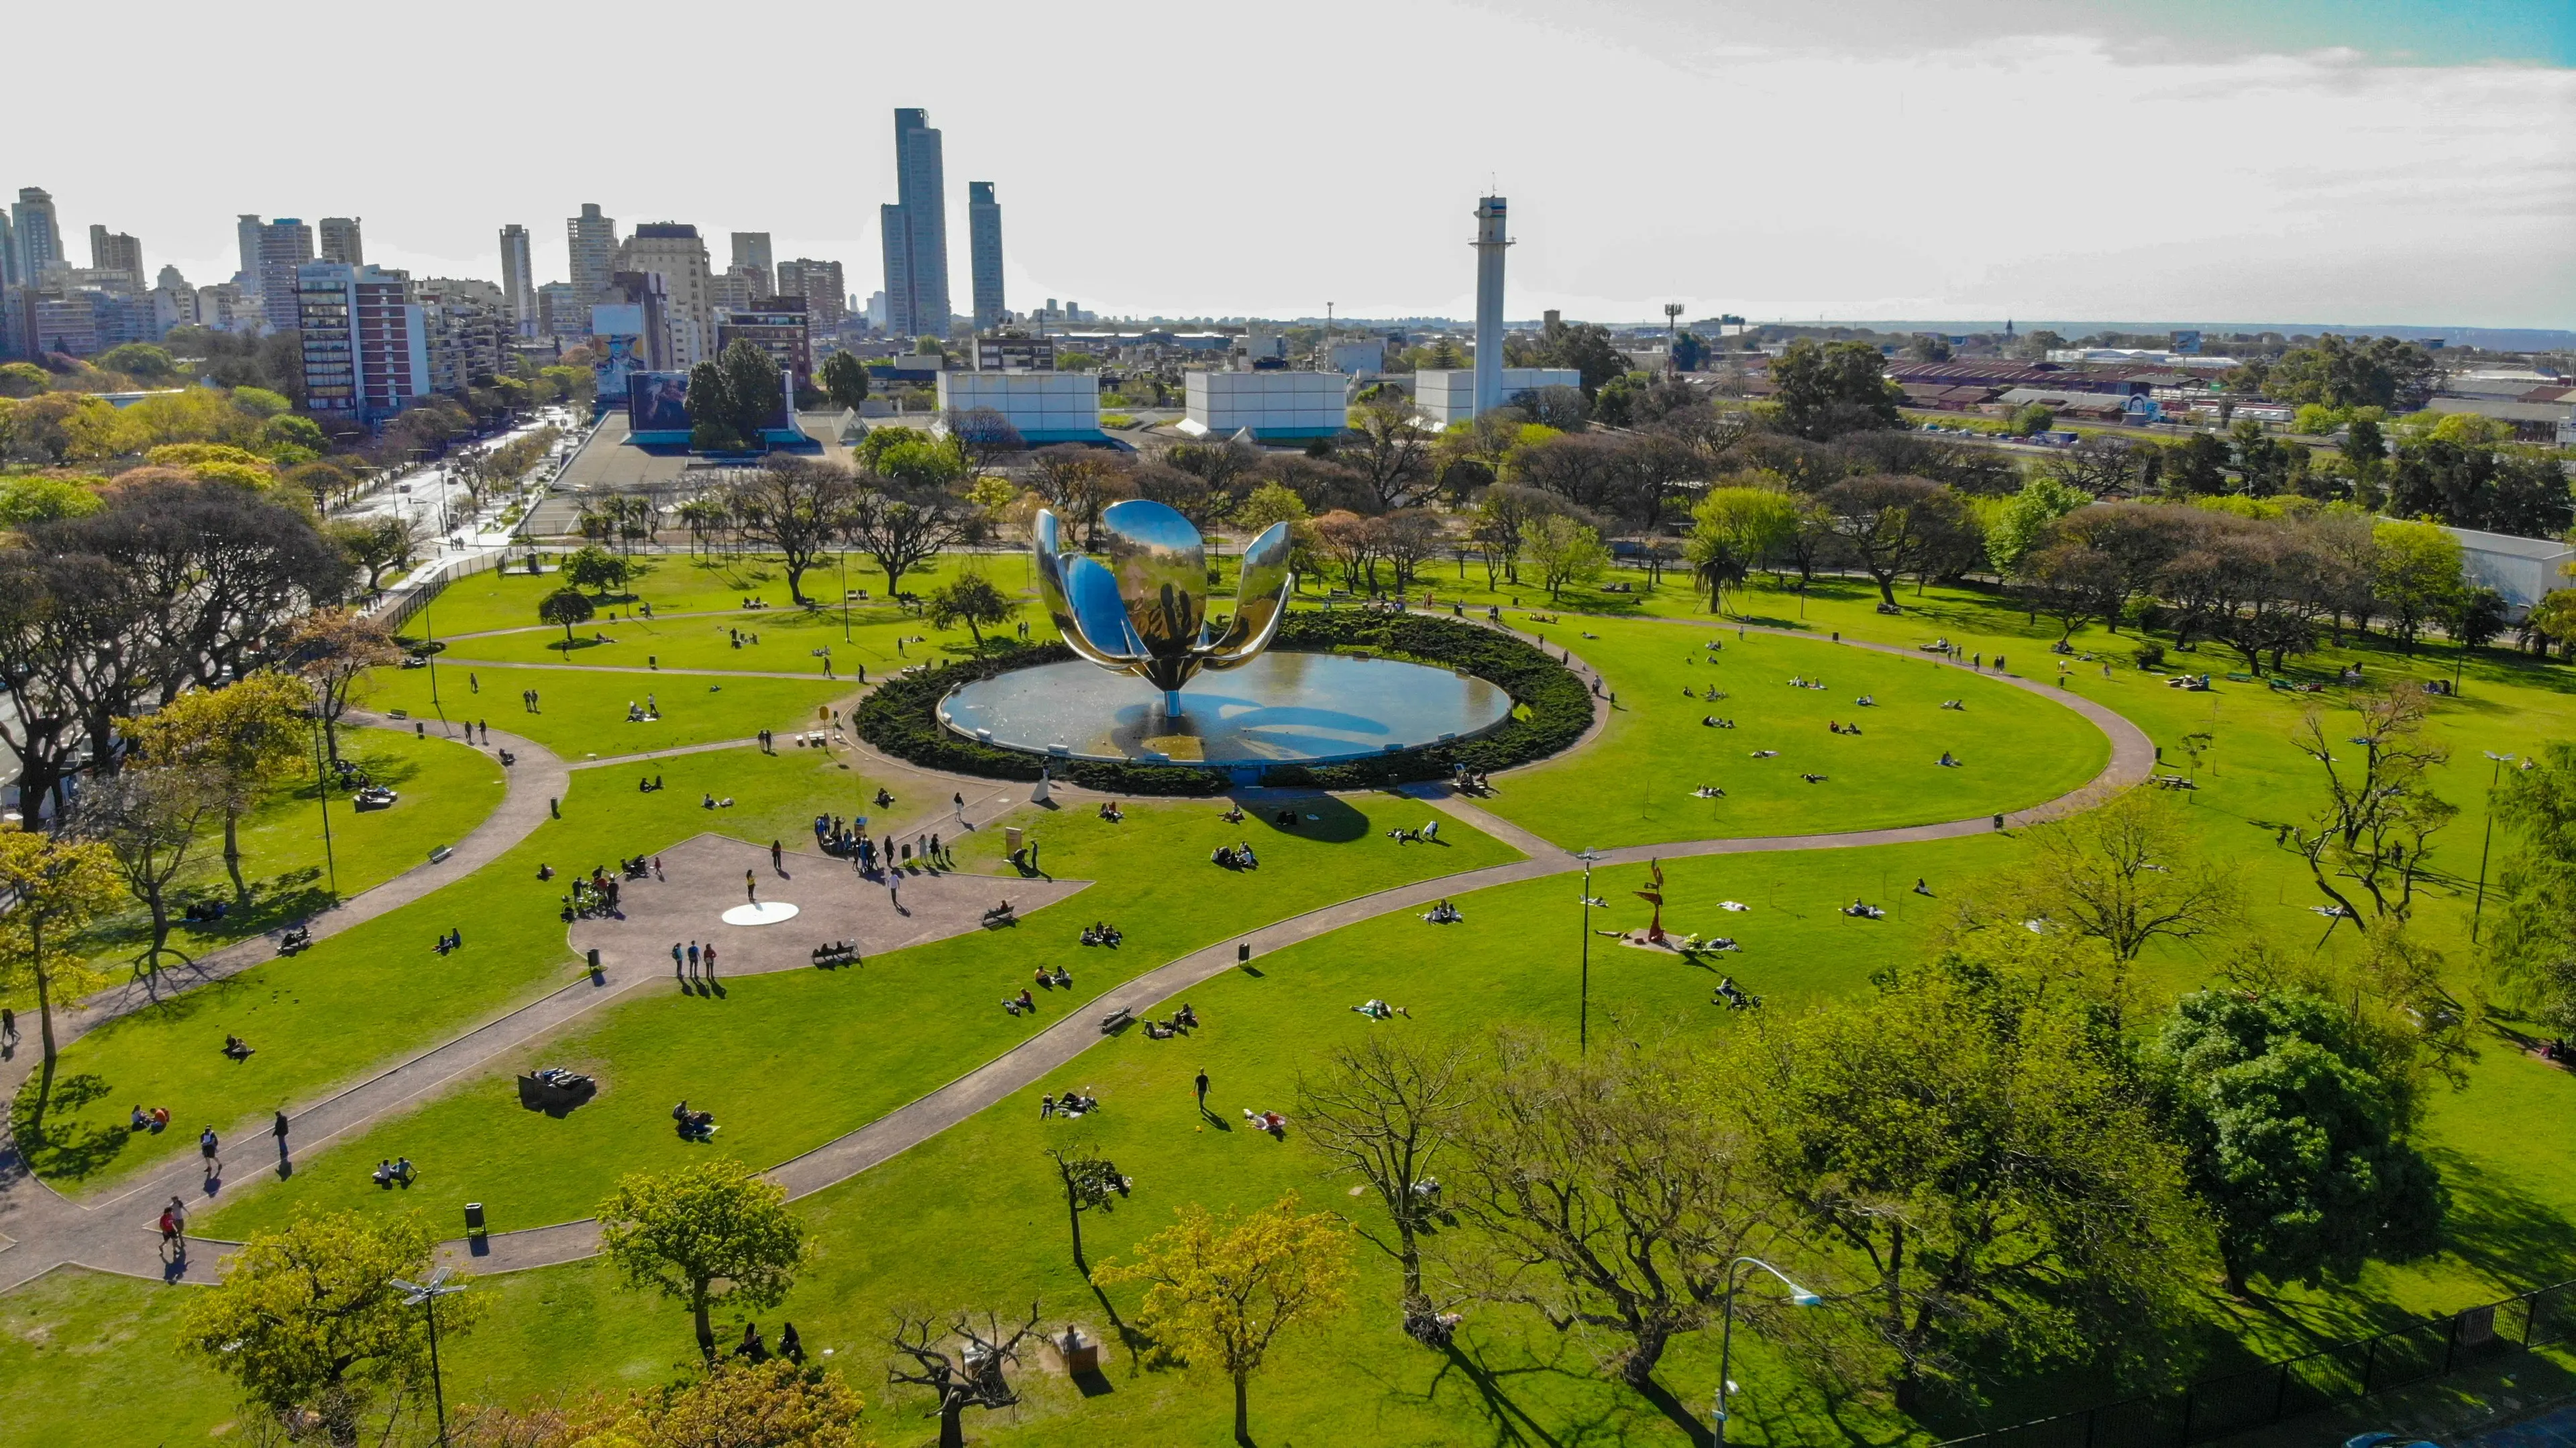 2-Day Buenos Aires Food, Wine & Nightlife Adventure with Friends